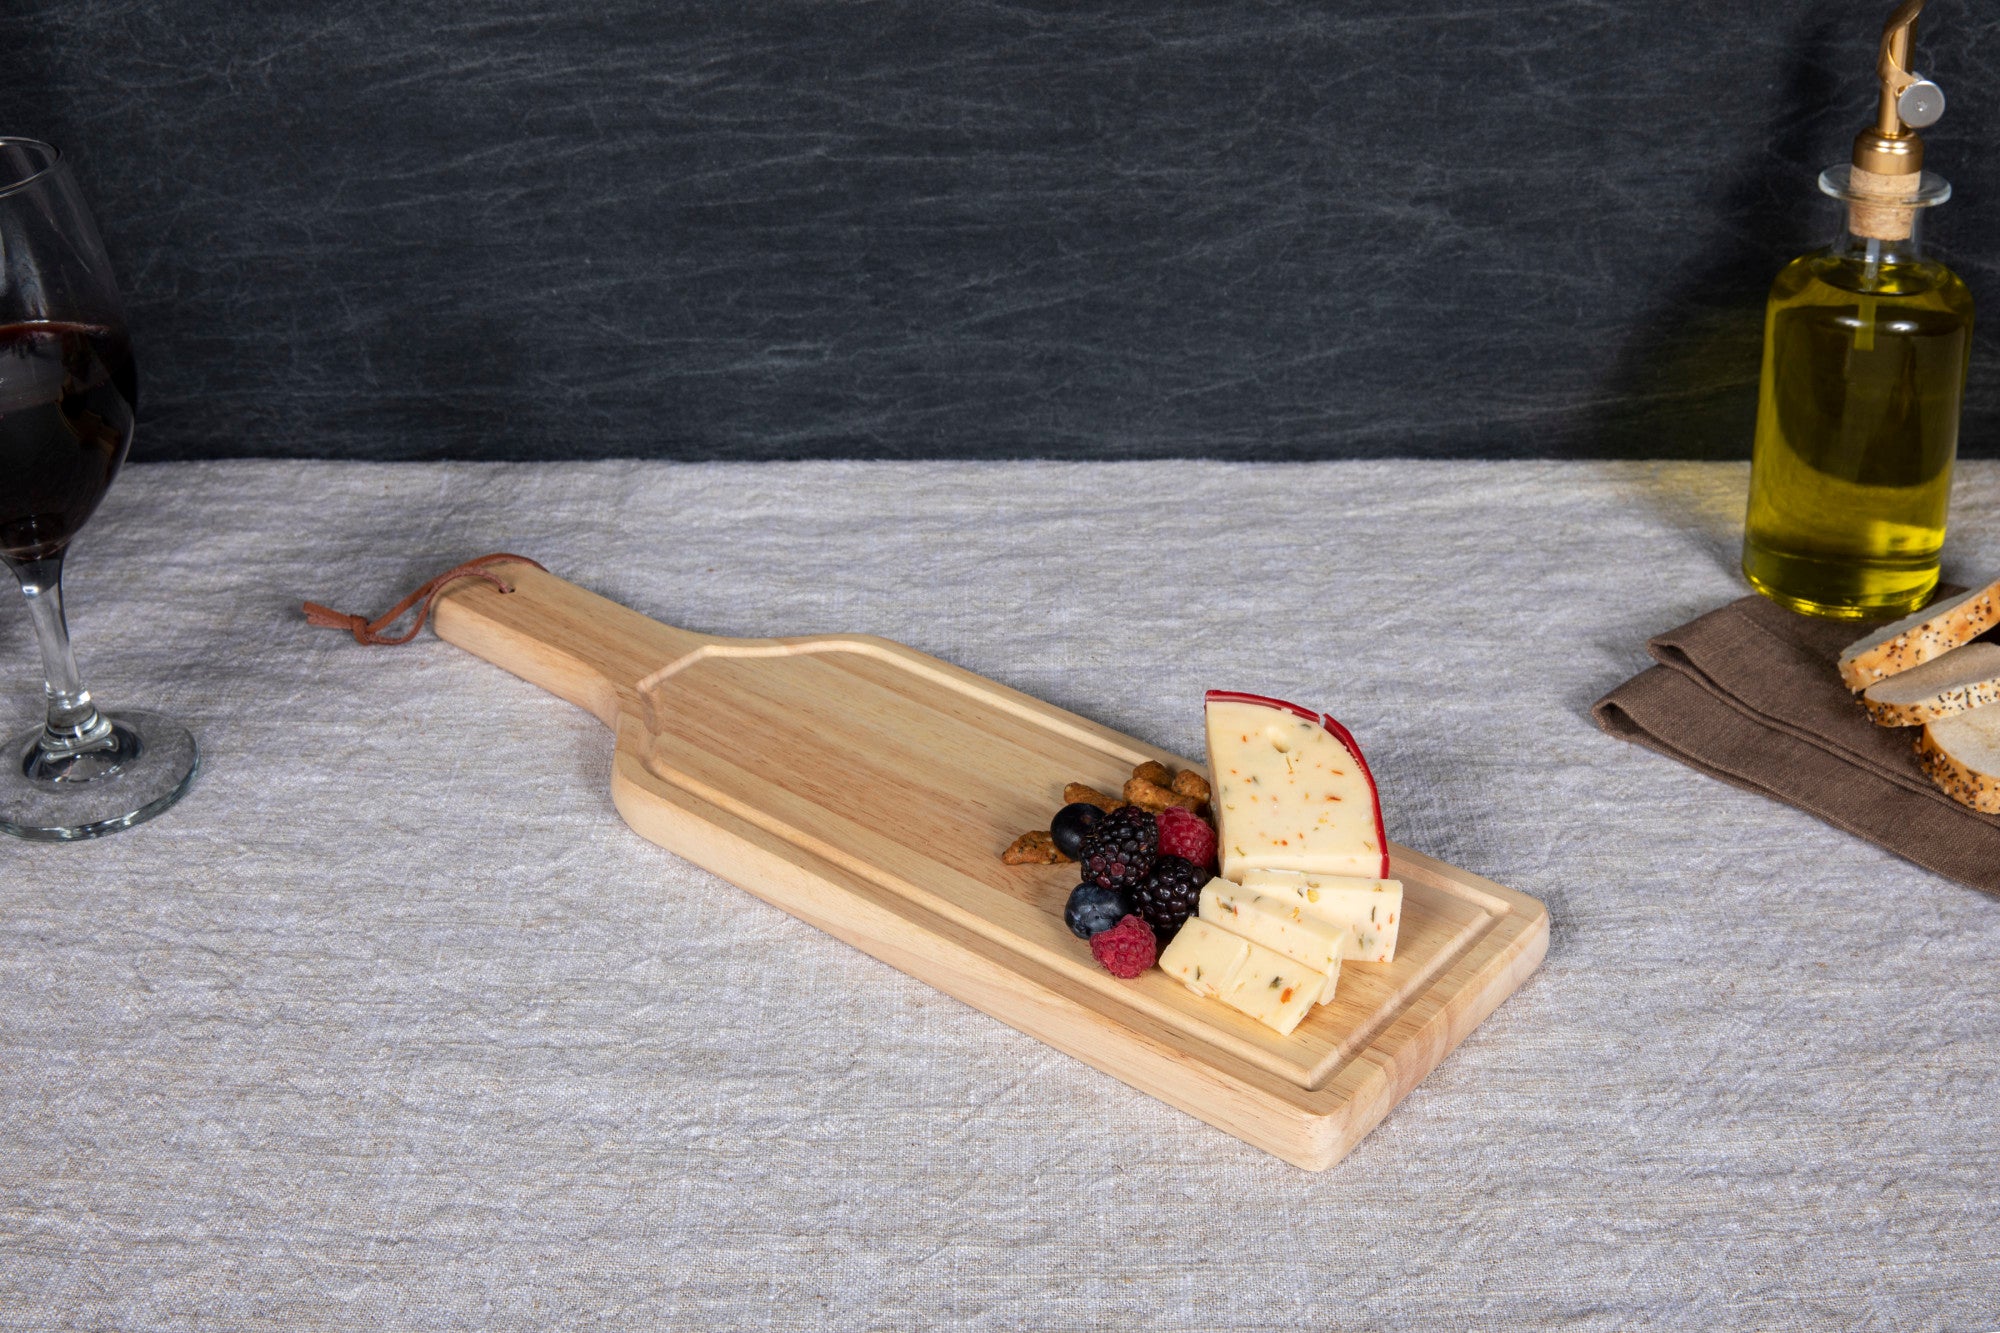 Chicago White Sox - Botella Cheese Cutting Board & Serving Tray